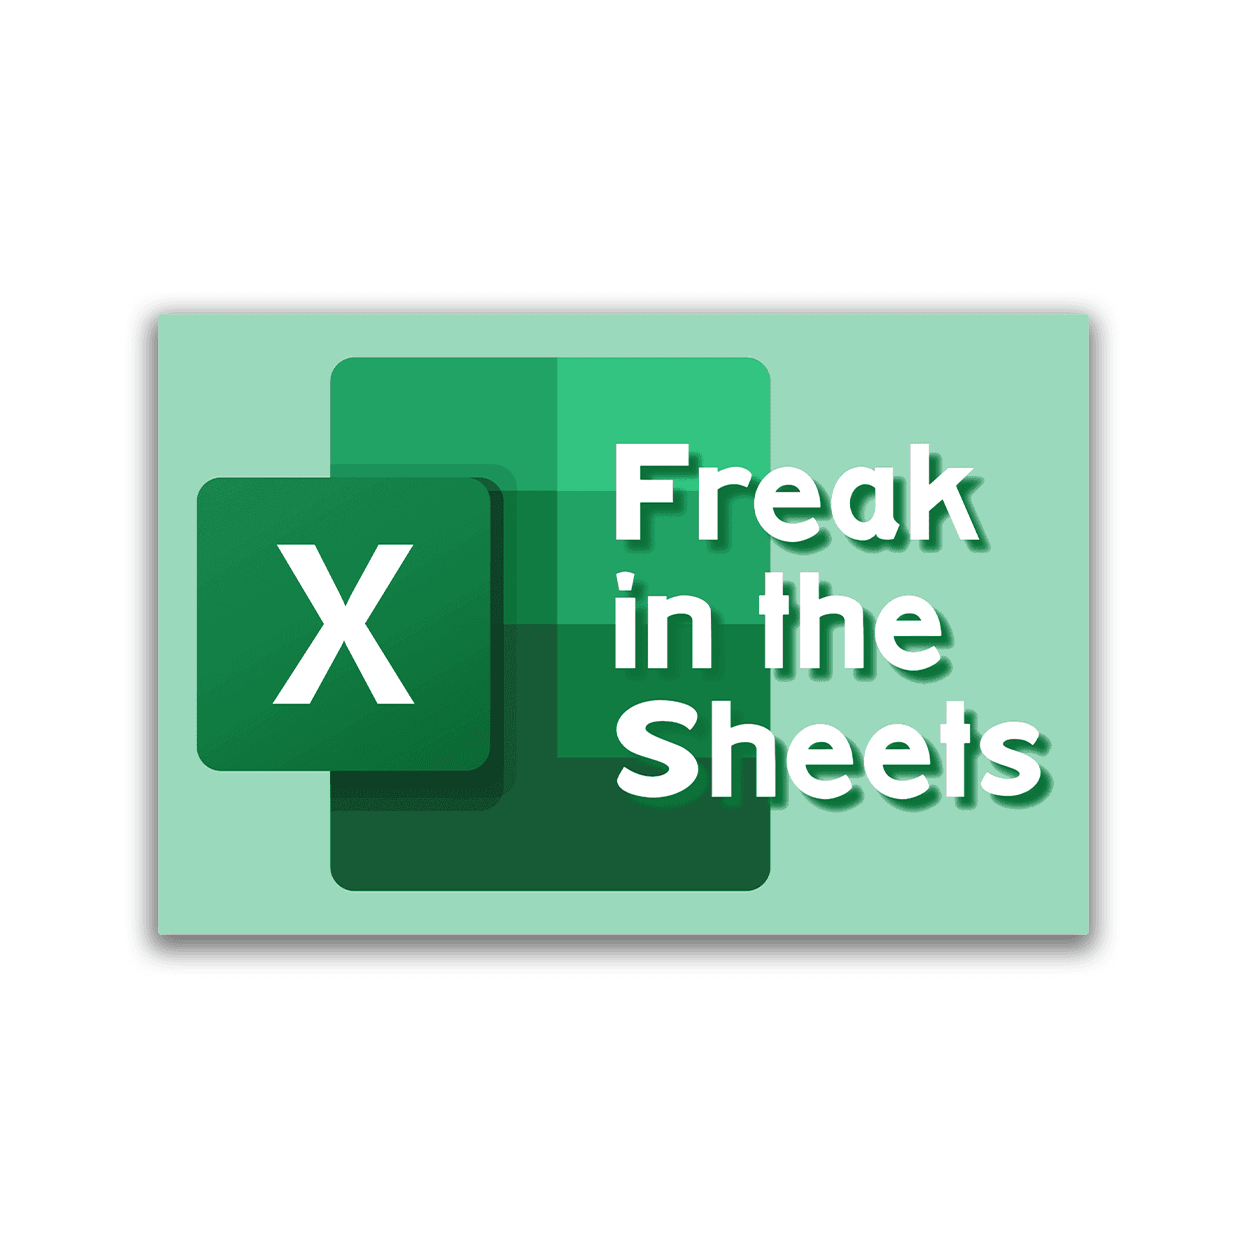 Freak in the Sheets - 2x3 Magnet